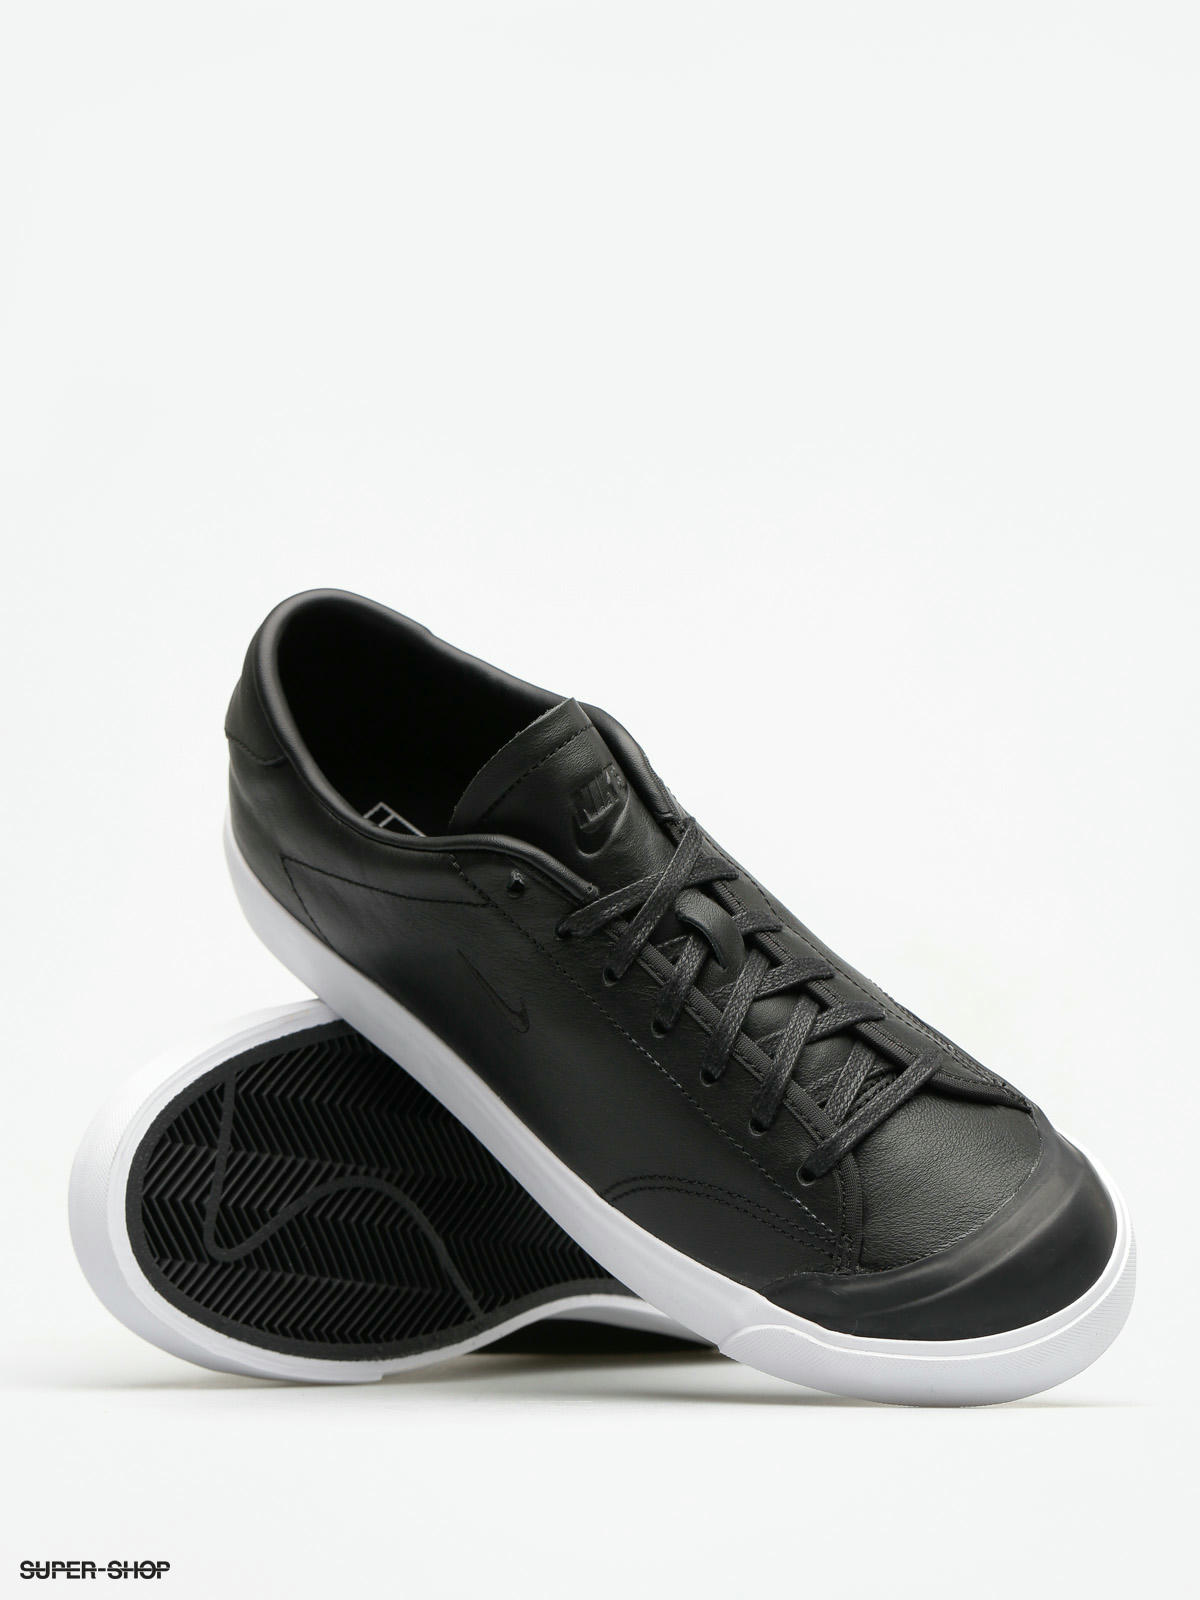 Nike All Court 2 Low Shoes (black/black white)